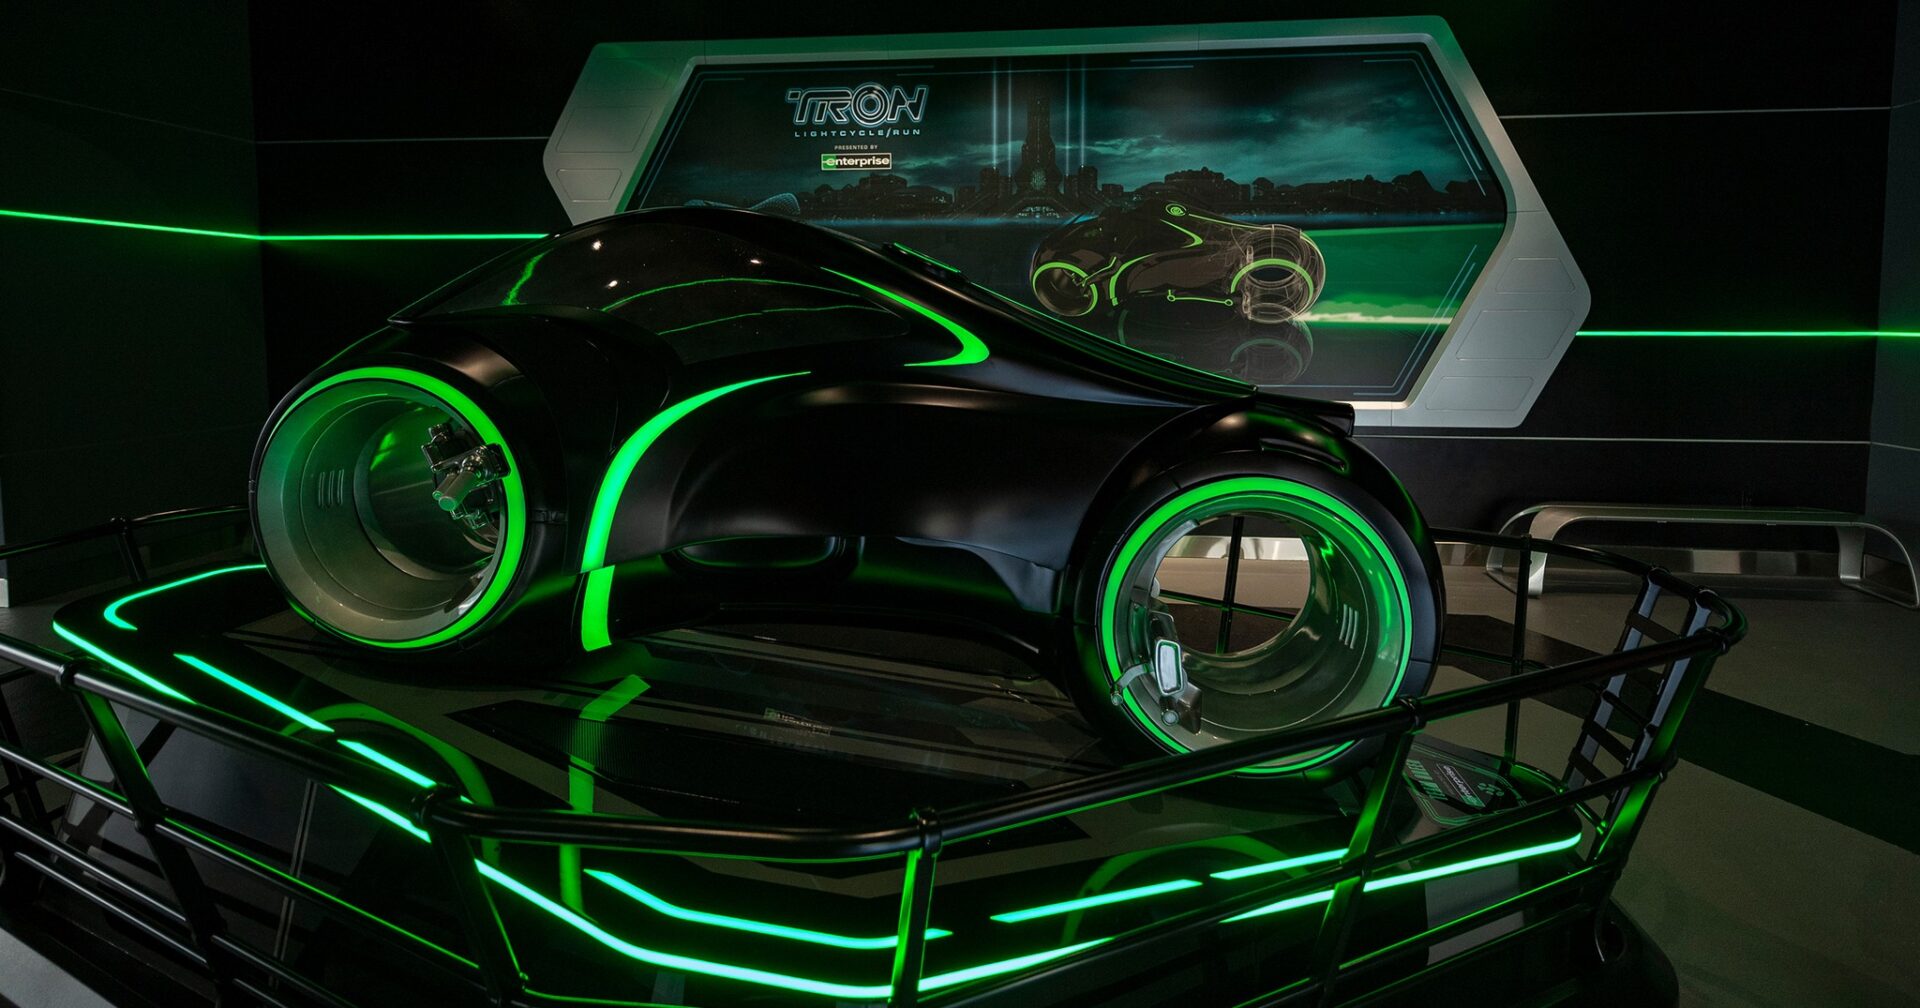 First Look at TRON Lightcycle Run Team Green Post-Show at Magic Kingdom